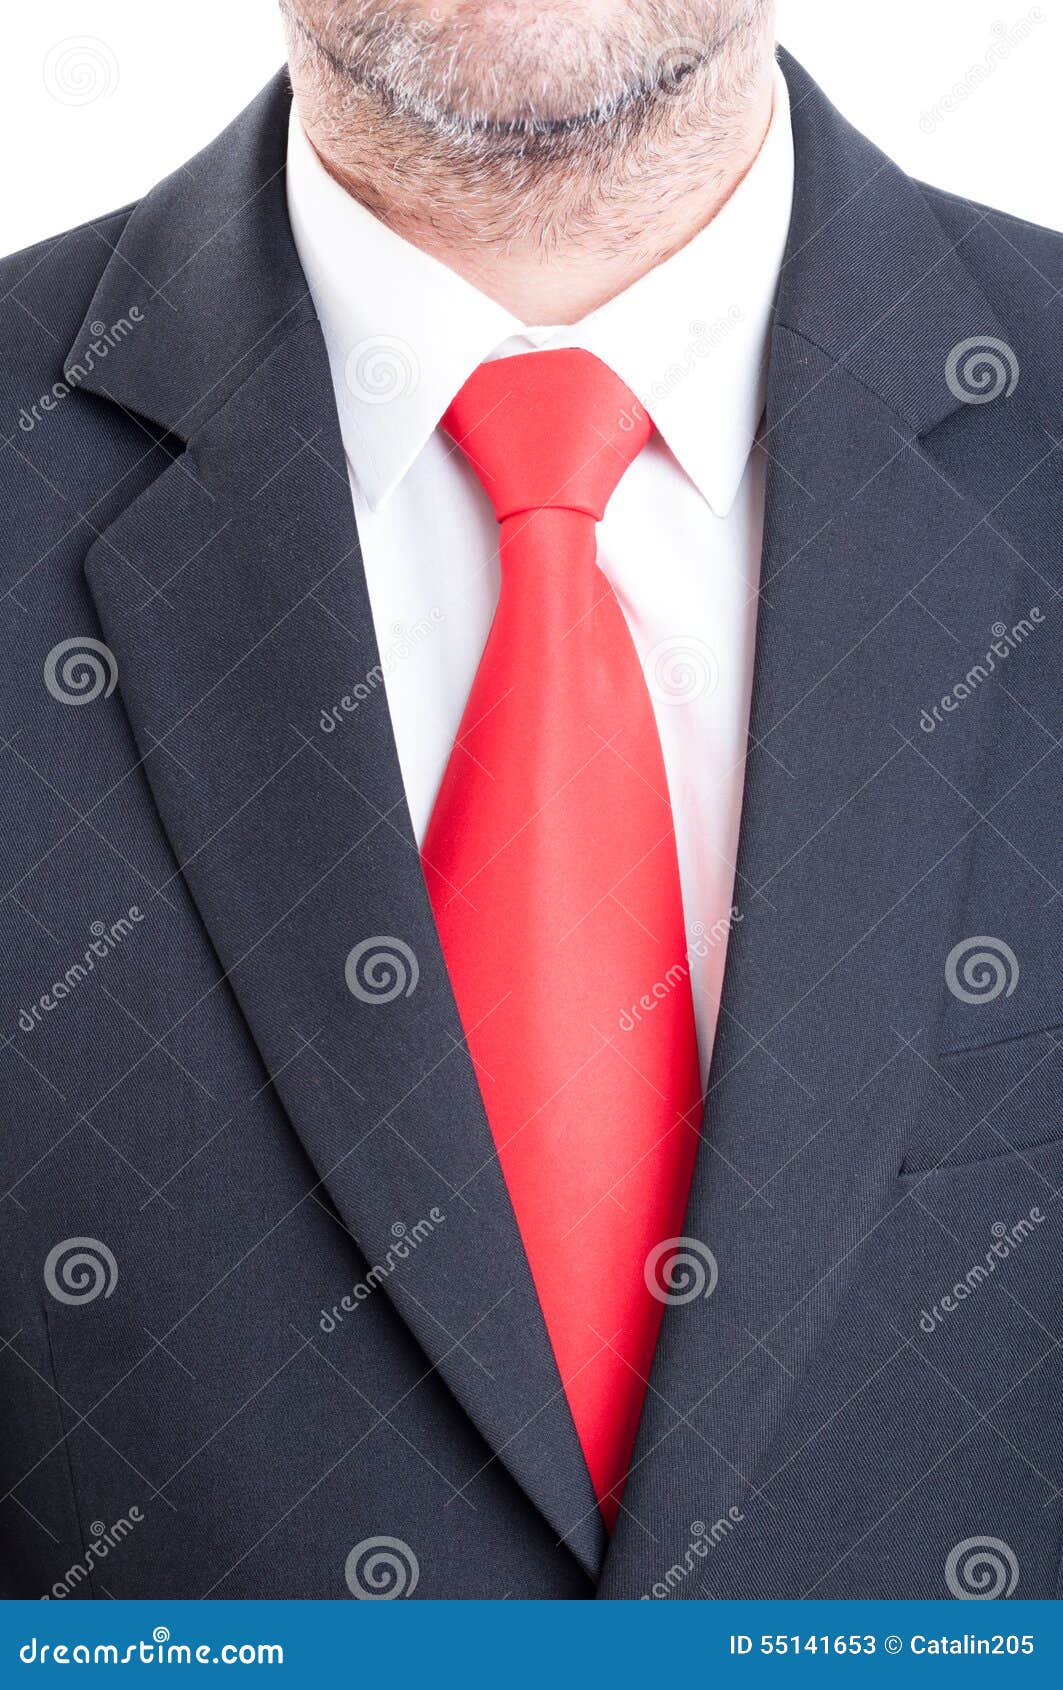 Black Suit, Red Tie, and White Shirt Stock Image - Image of manager